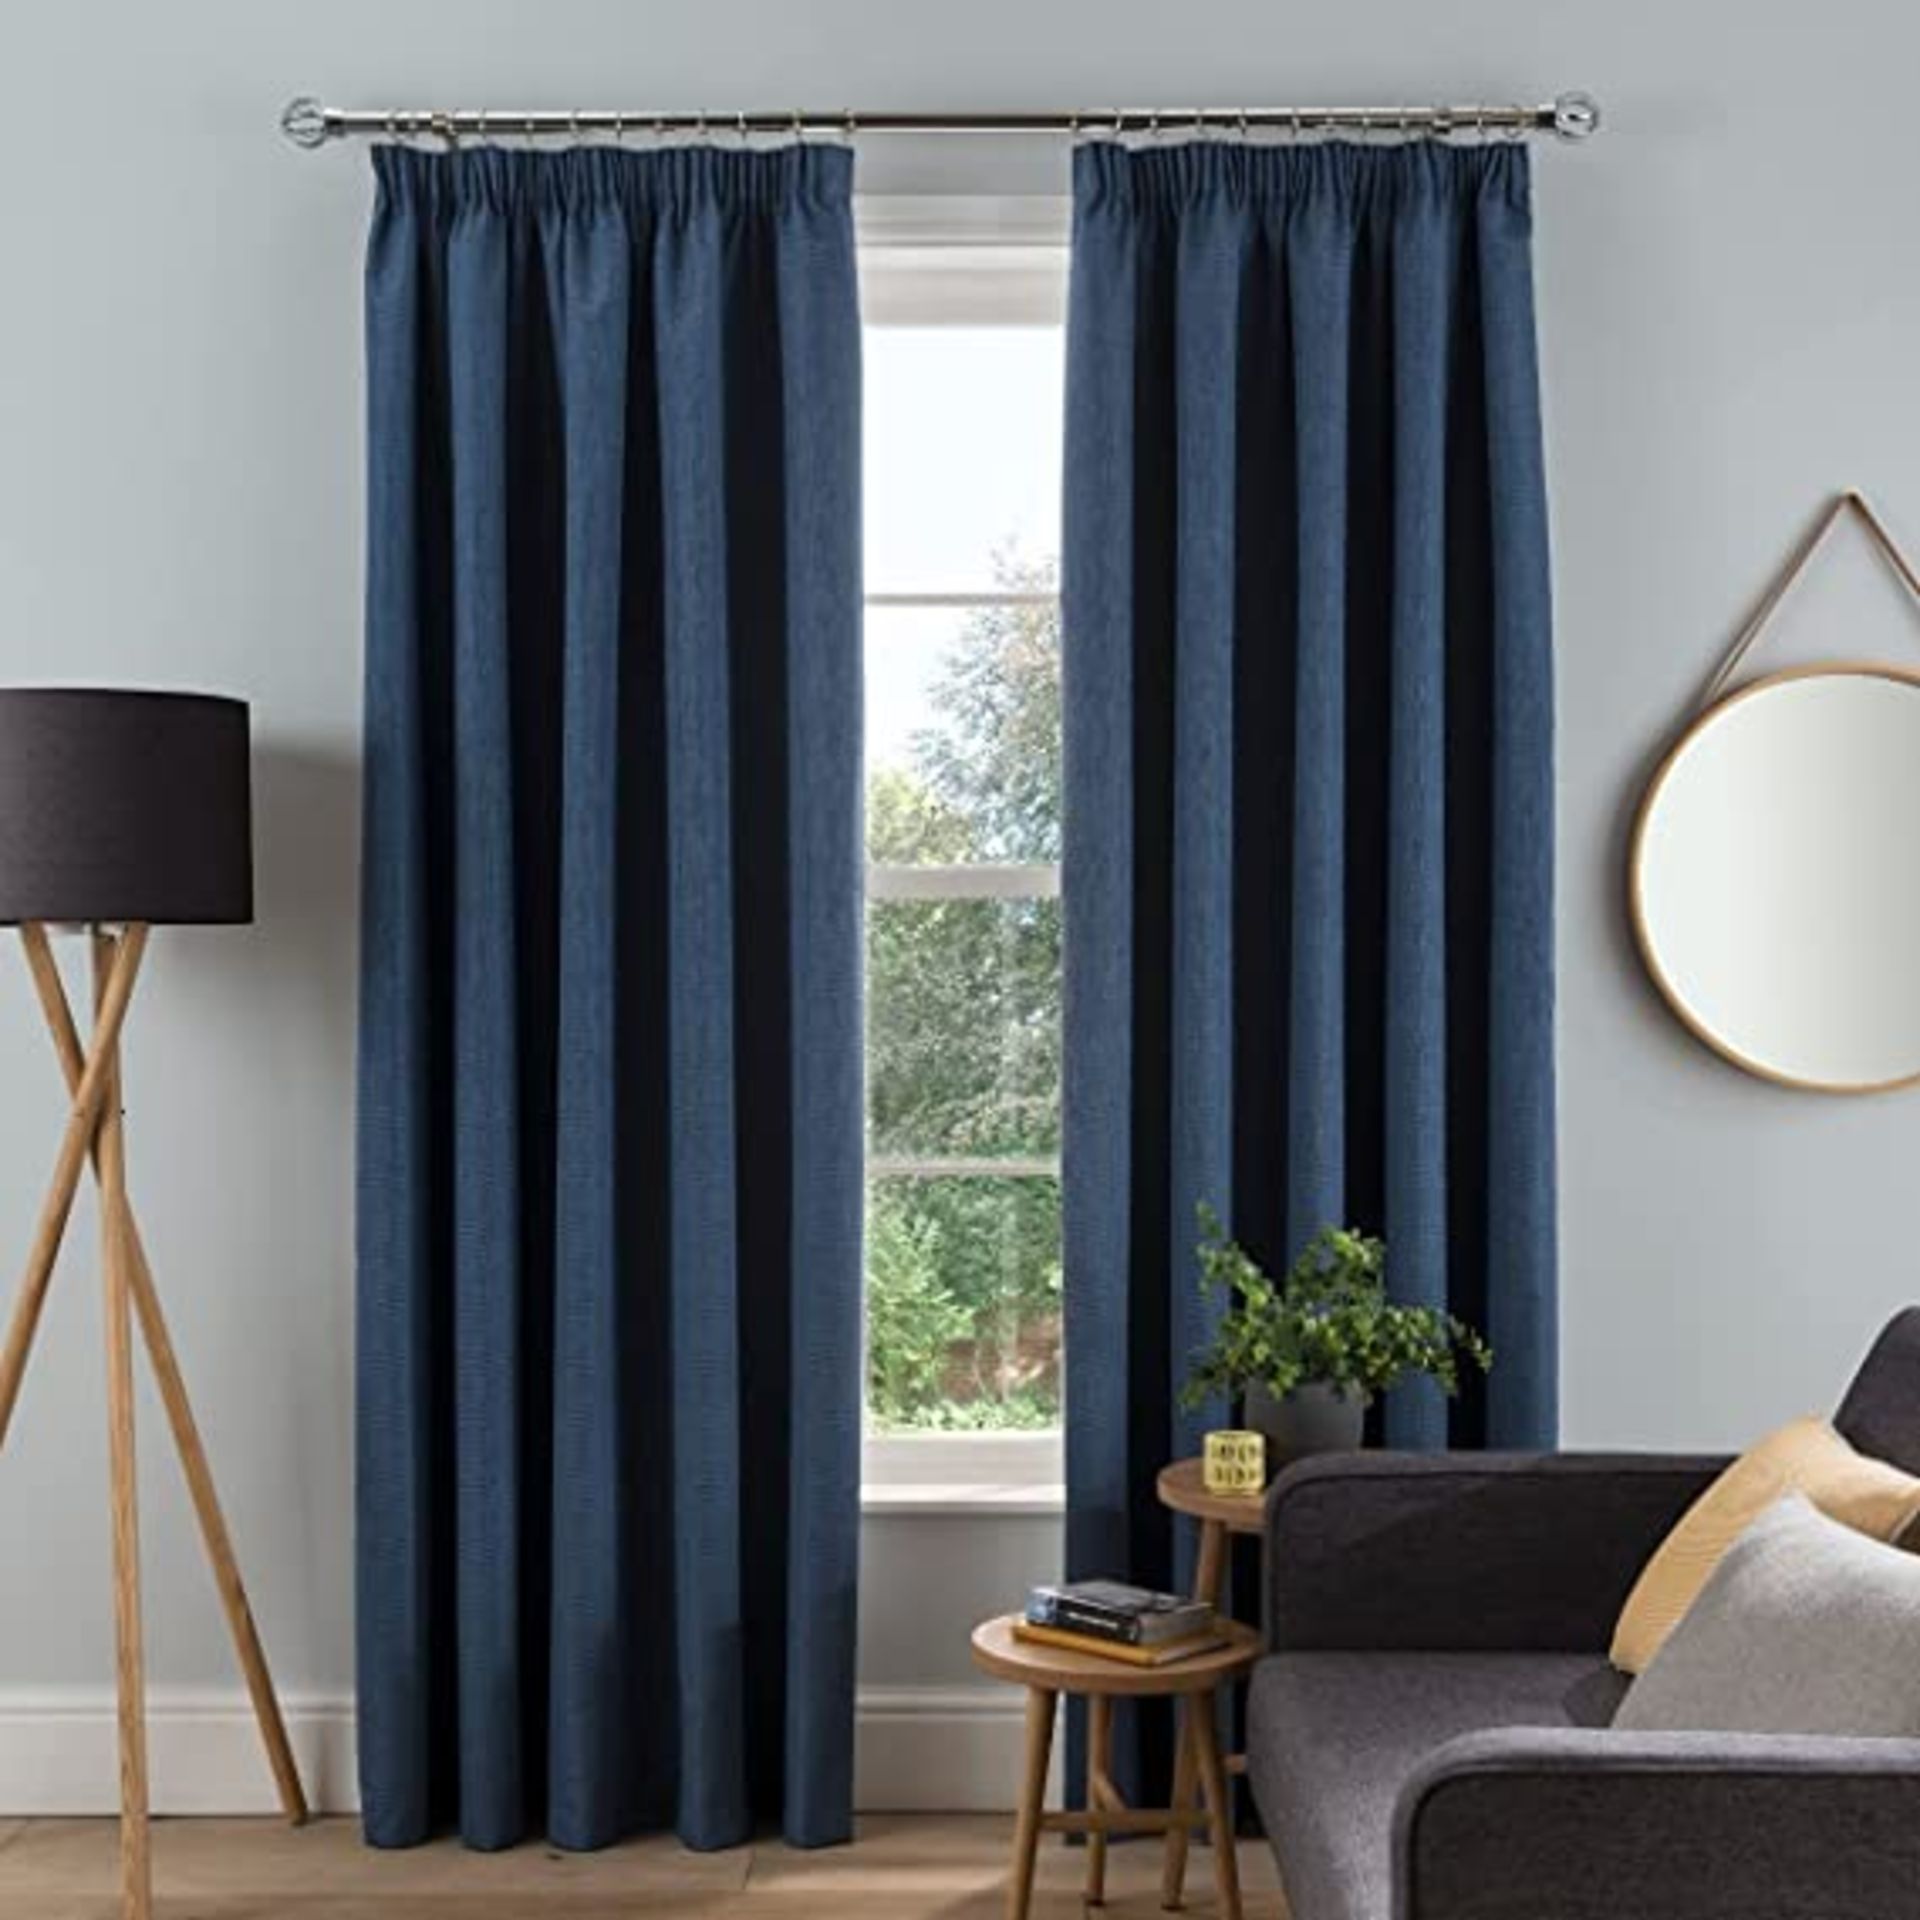 Sleepdown Textured Rib Weave Pencil Pleat Blackout Lined Curtains Thermal Insulated for Bedroom and